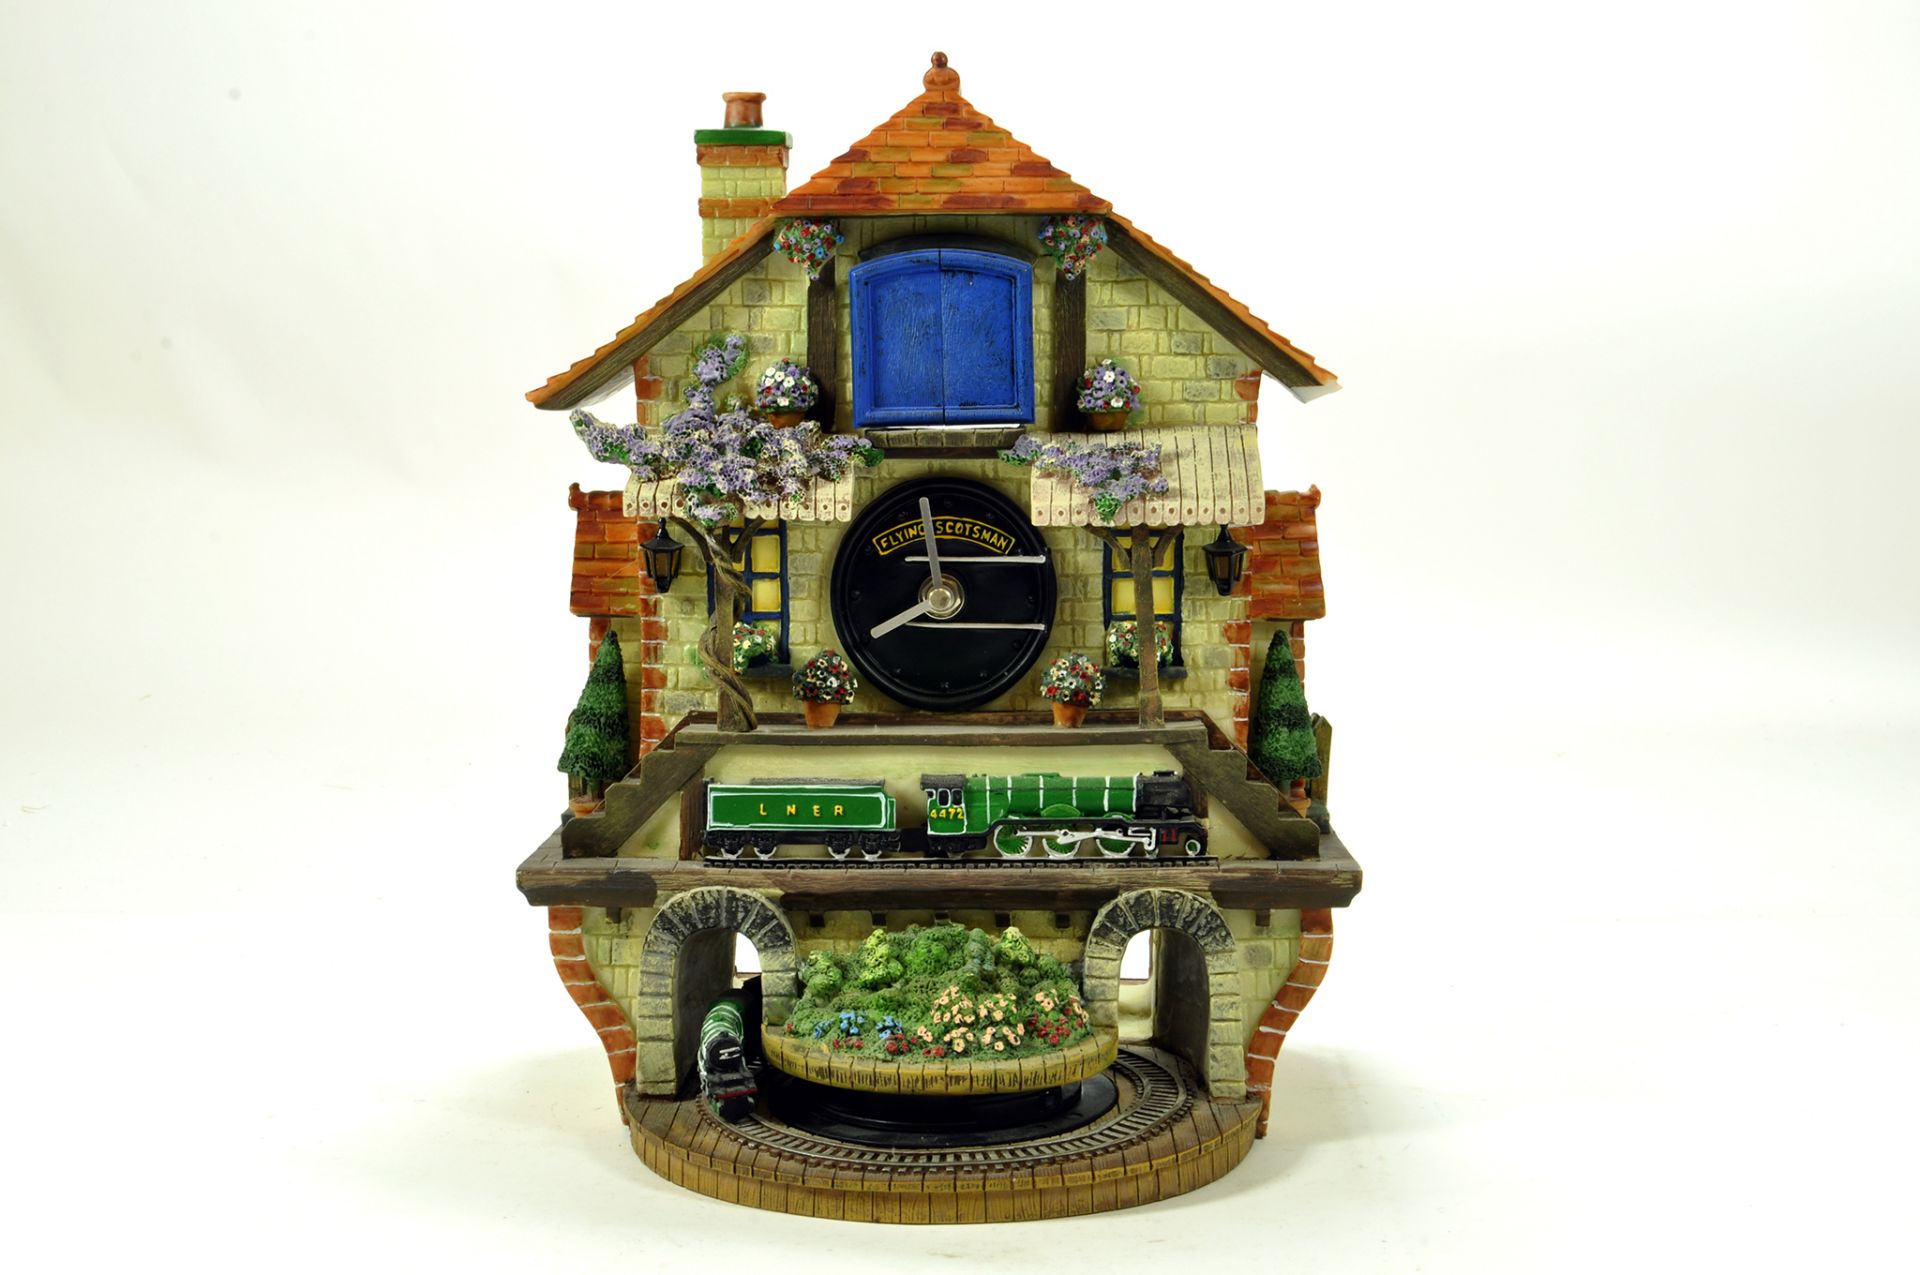 A fine presentation Cuckoo Clock, featuring the Flying Scotsman complete with Box.